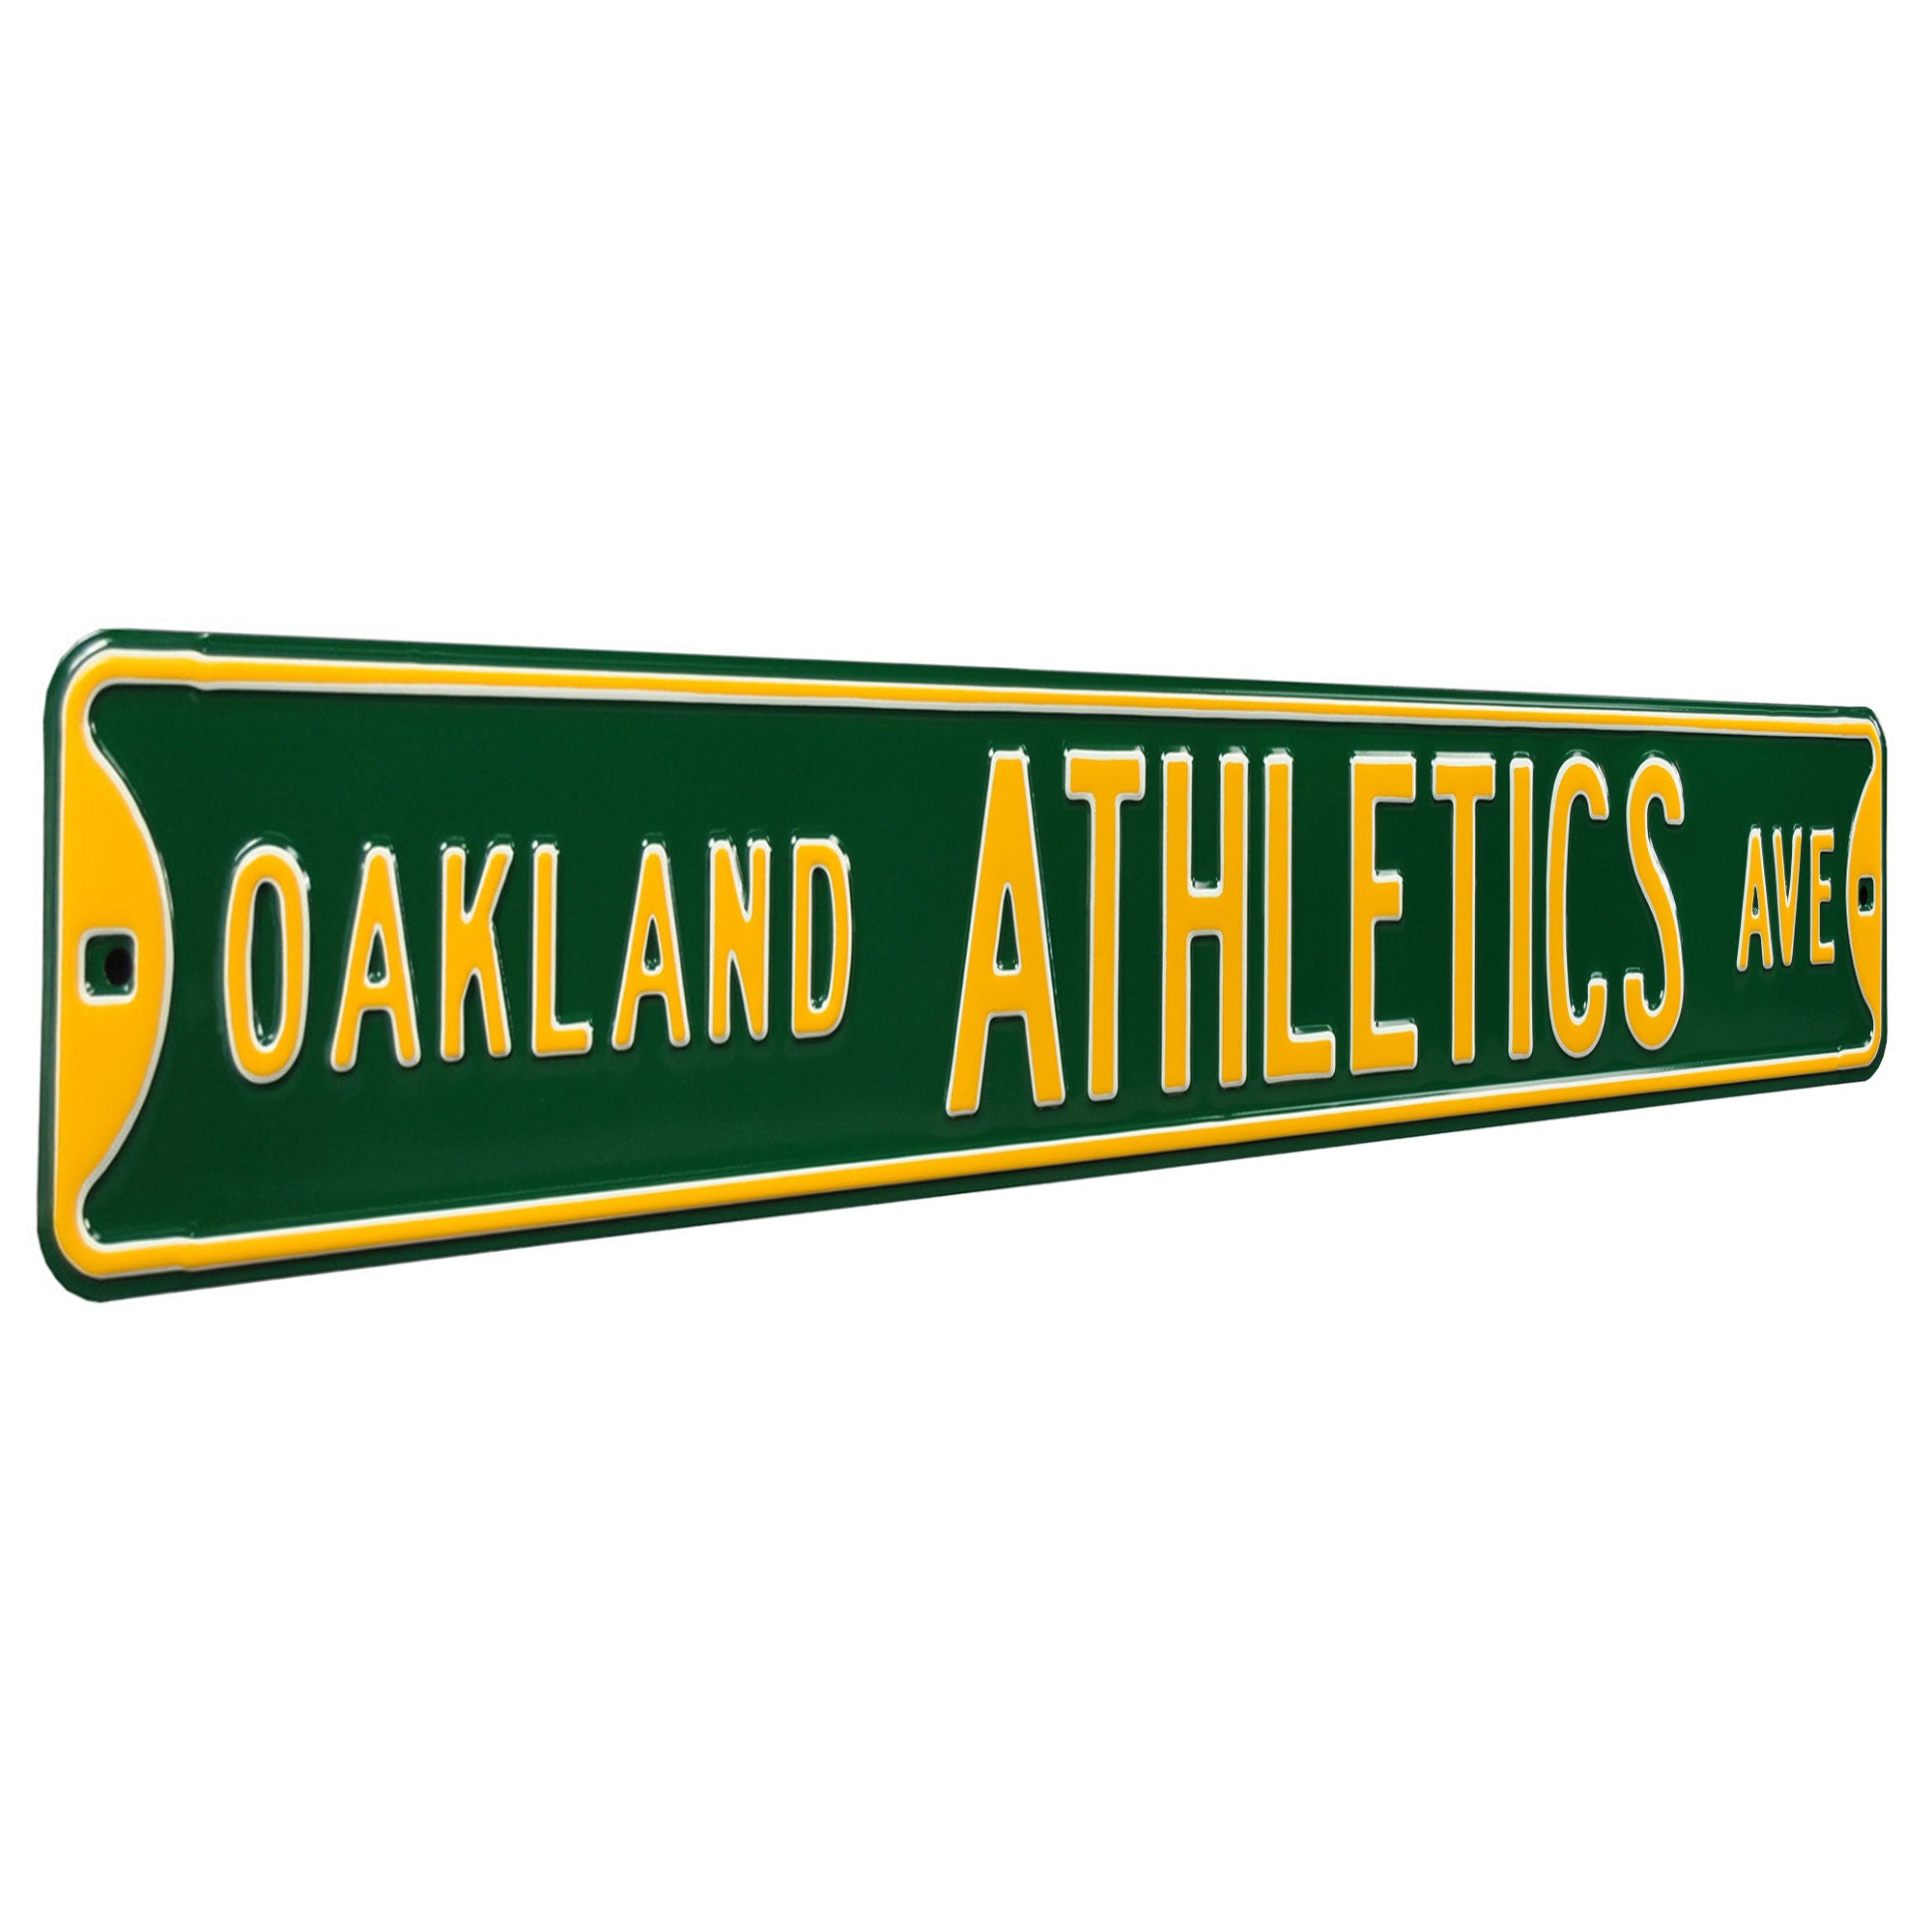 Authentic Street Signs 30121 Oakland Athletics Avenue Street Sign